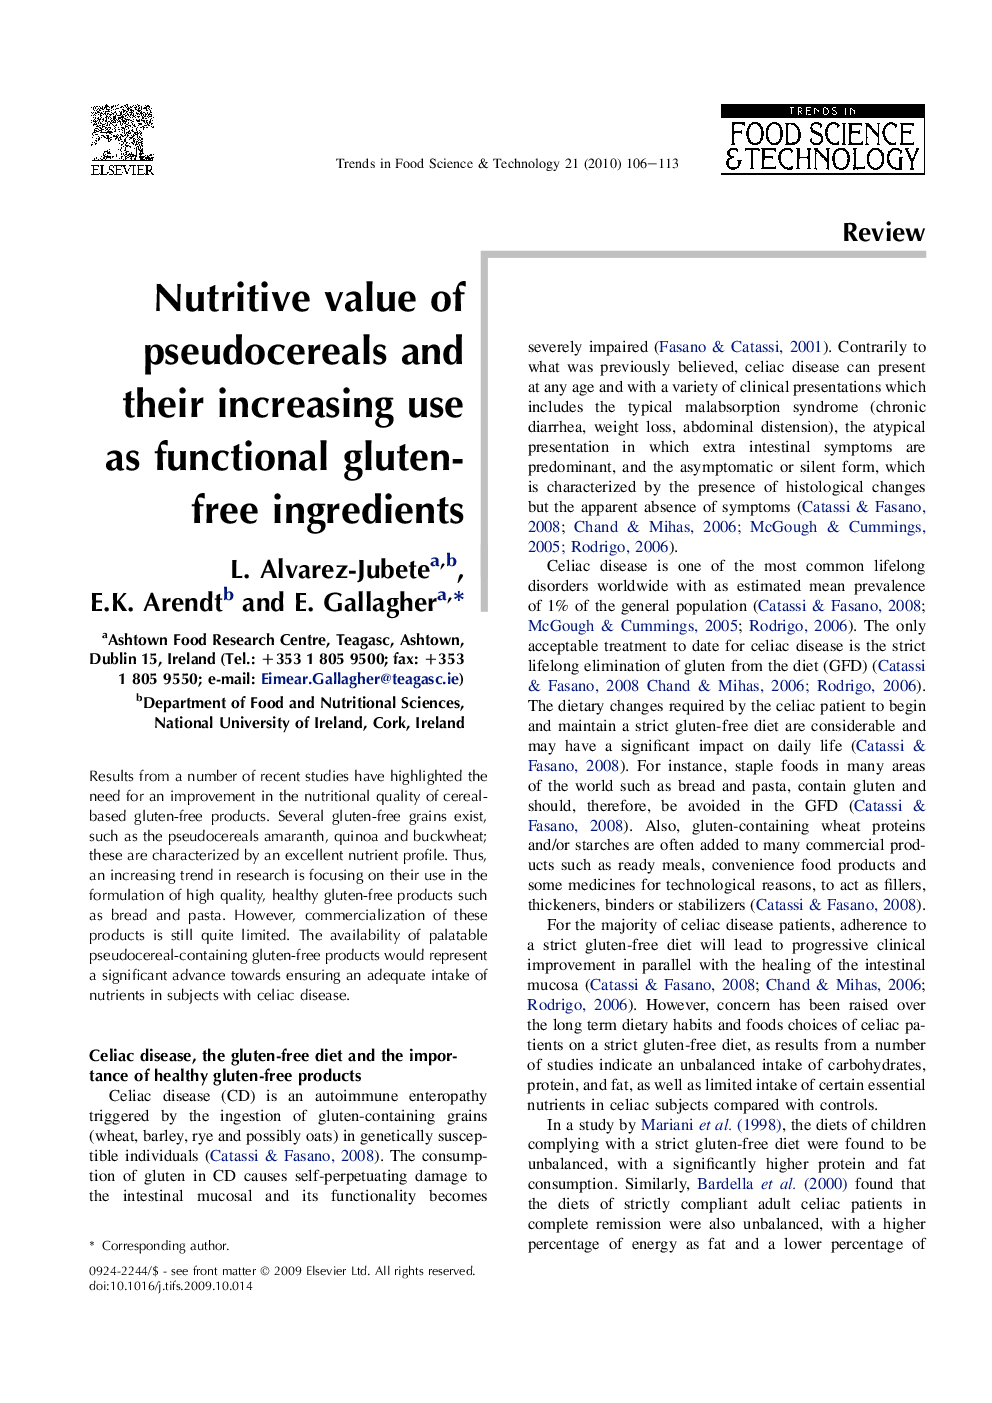 Nutritive value of pseudocereals and their increasing use as functional gluten-free ingredients